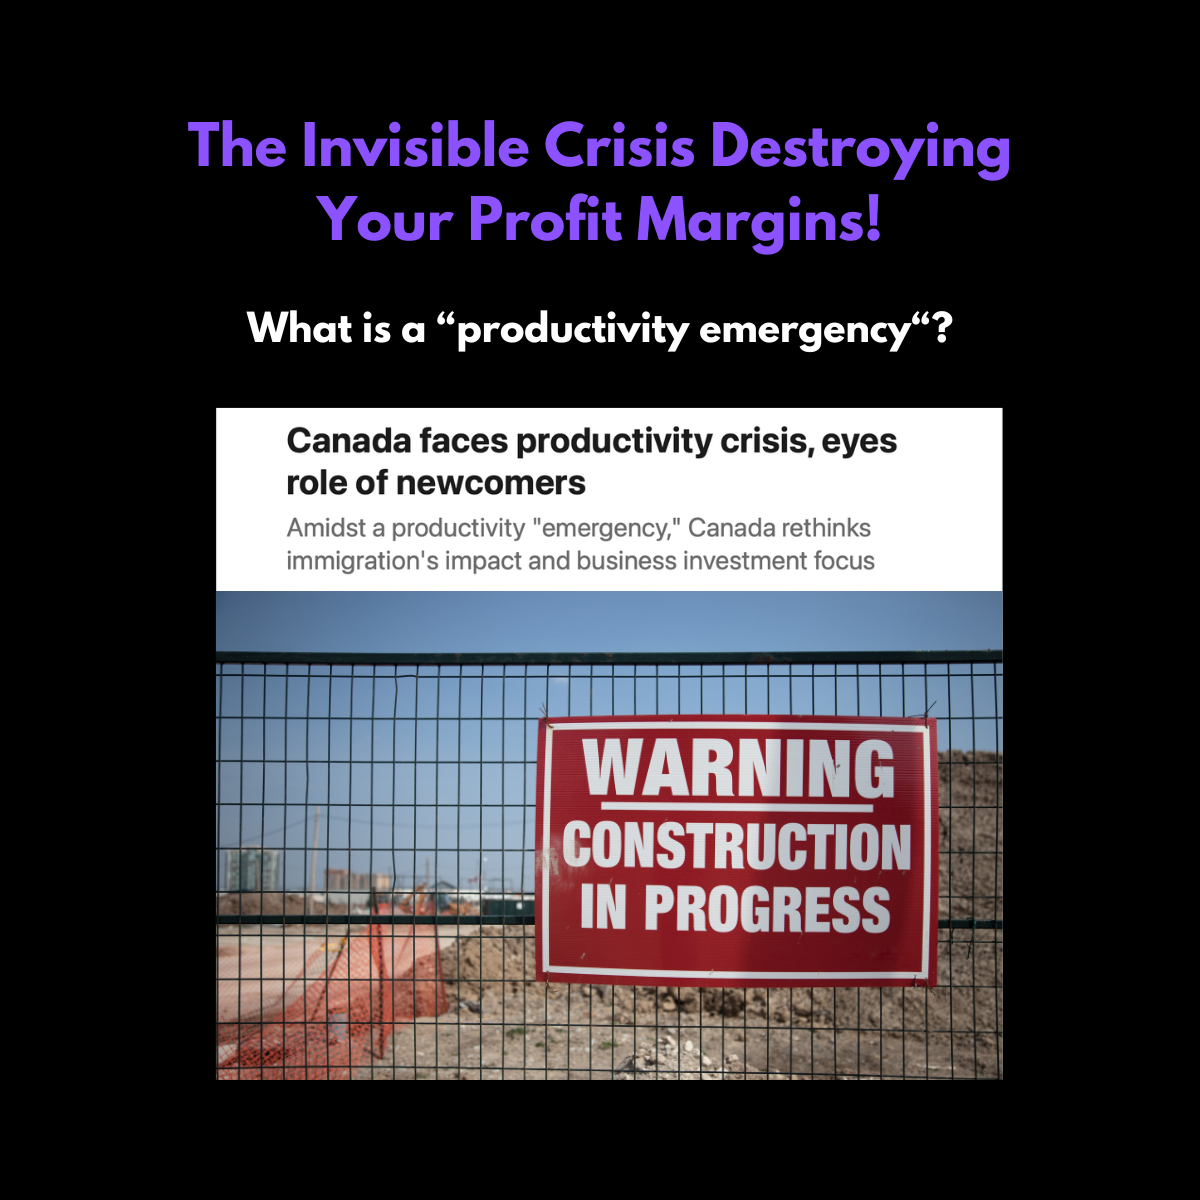 The Invisible Crisis Destroying Your Profit Margins!